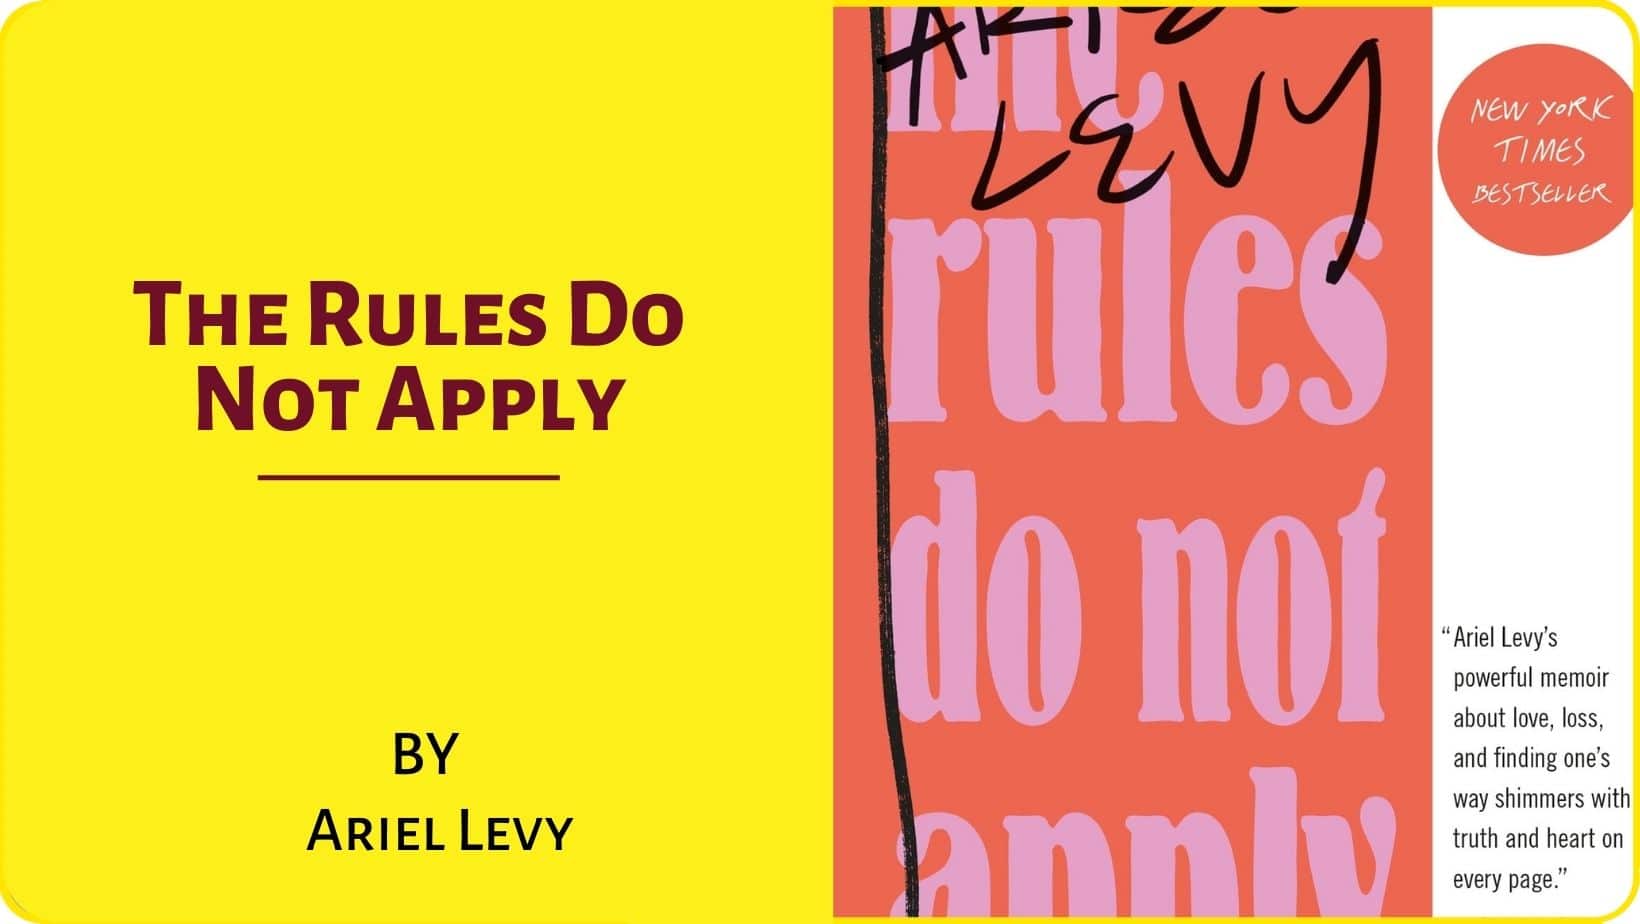 great breakup relationship heartbreak books to read The Rules Do Not Apply by Ariel Levy